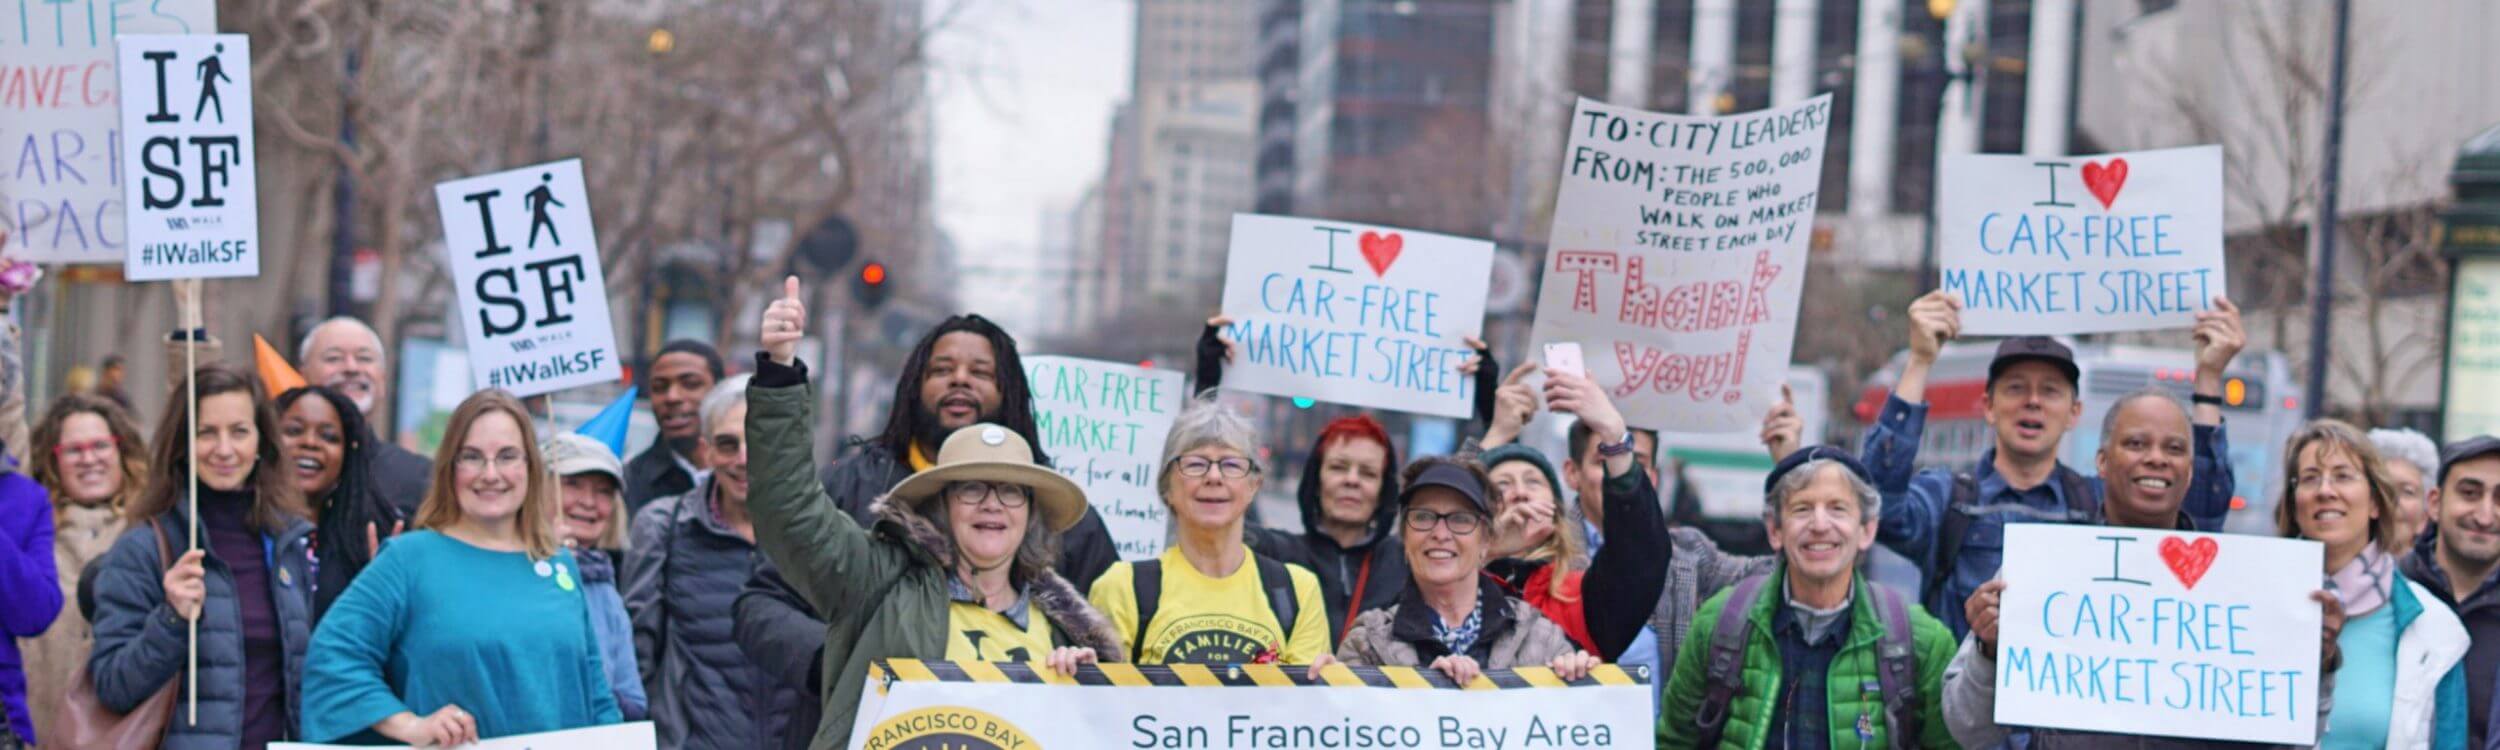 Speak out to protect the future of Market Street from November 2-30